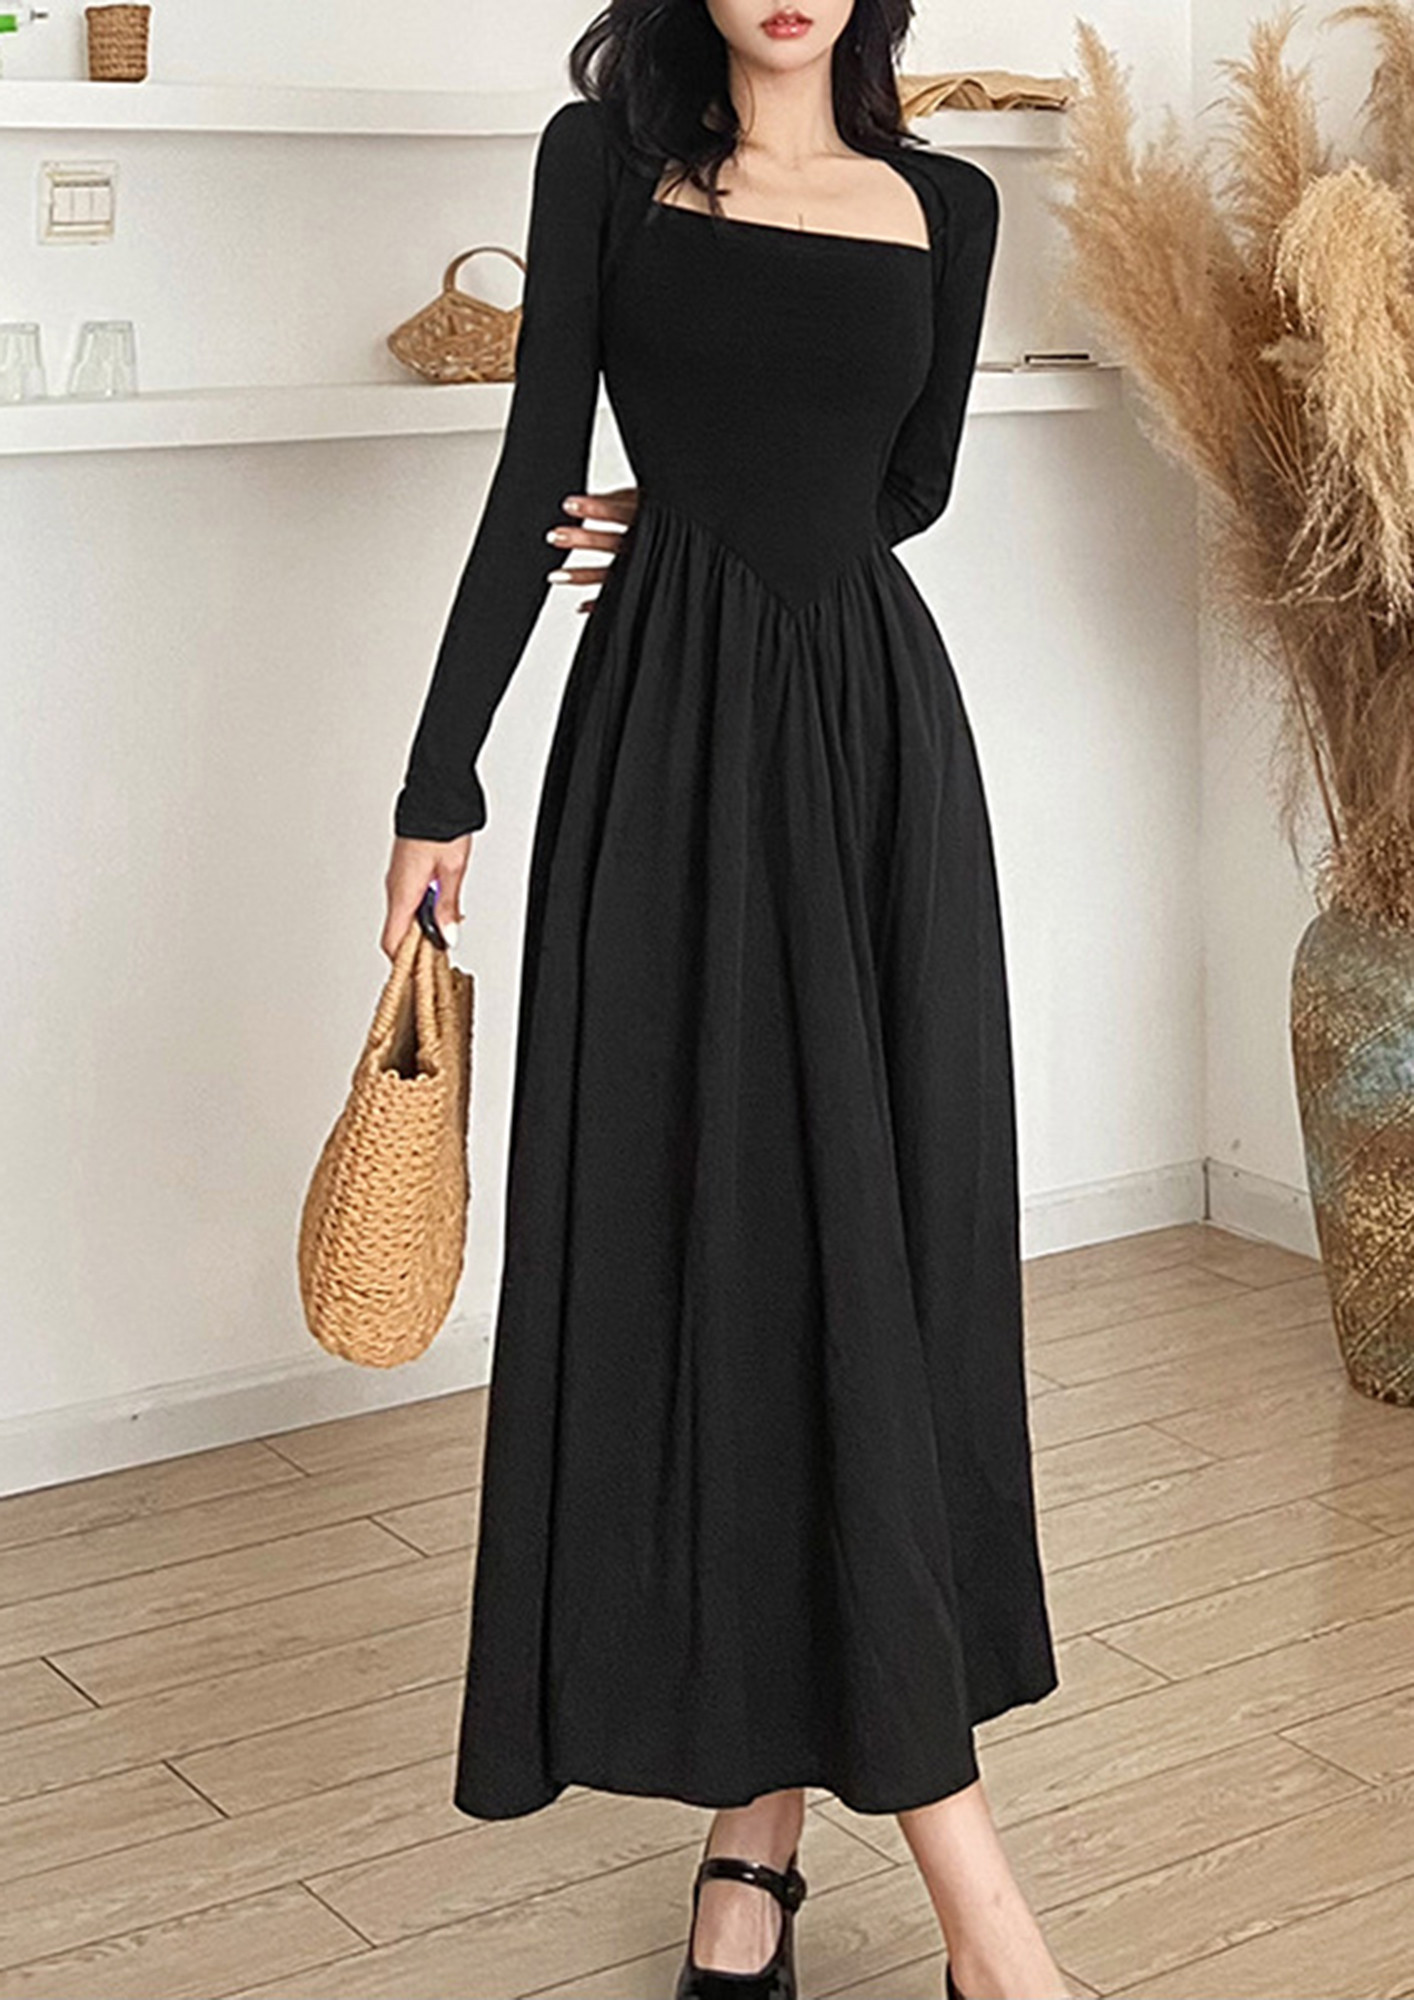 One Piece Black Dress For Woman